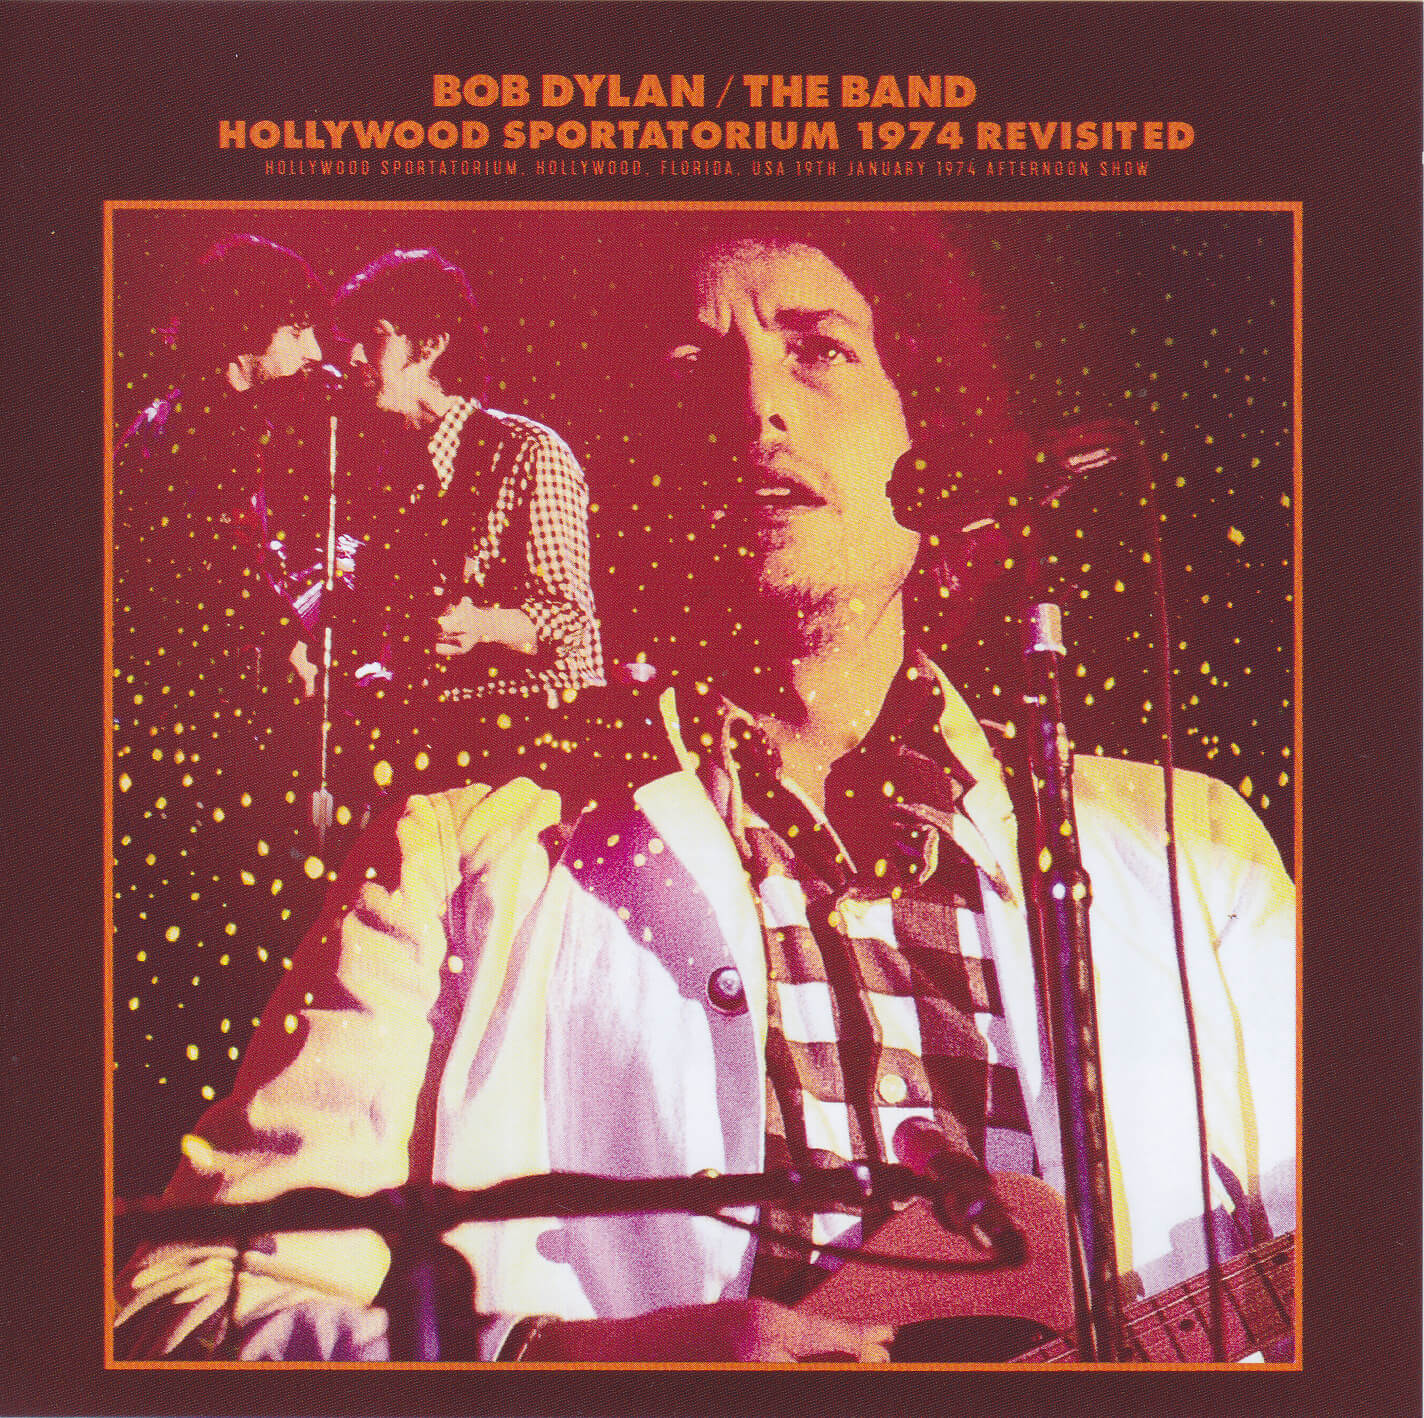 Bob Dylan & The Band / Hollywood Sportatorium 1974 Revisited / 2CD 